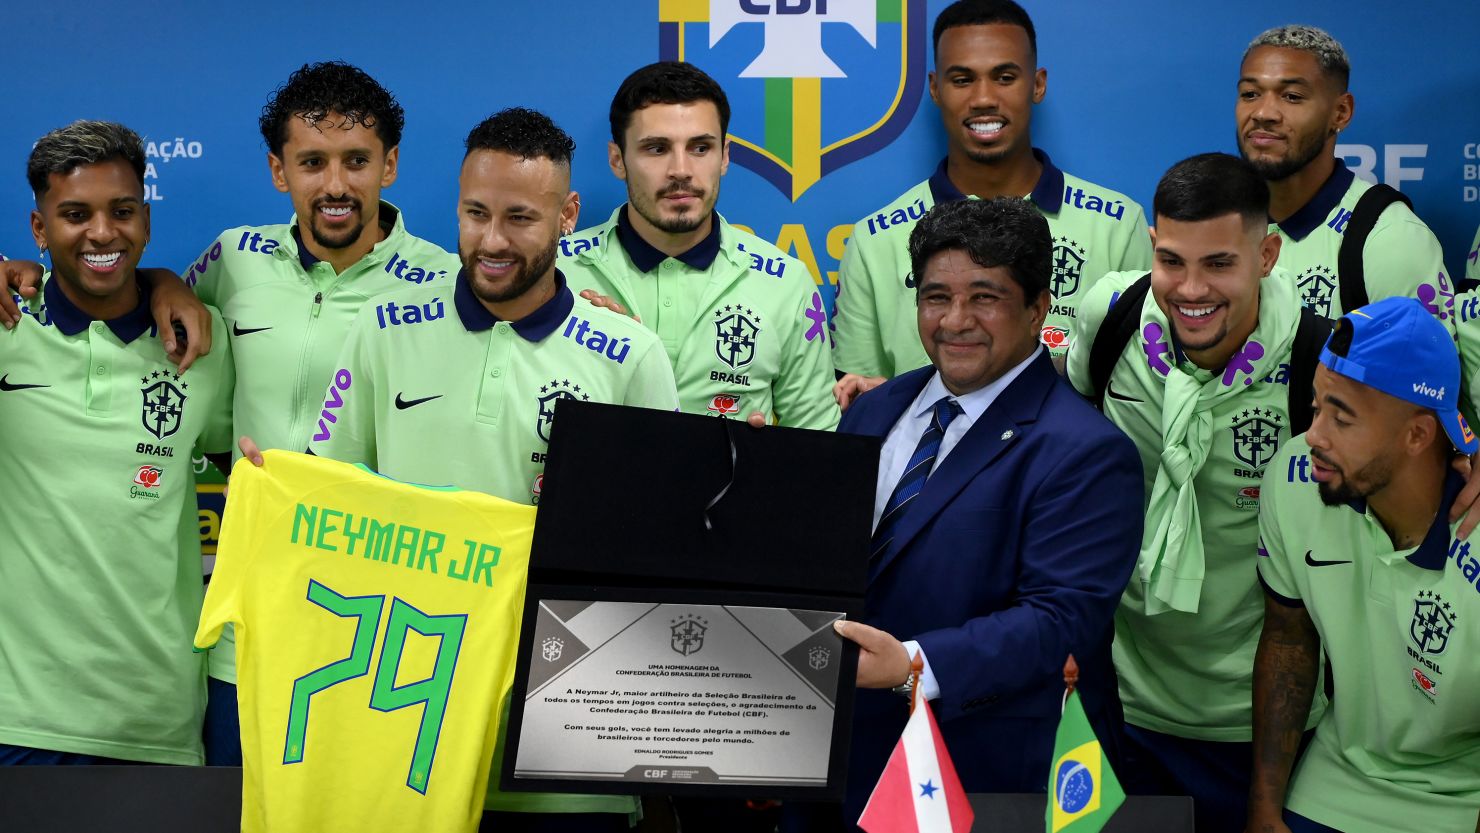 Neymar Jr. receives tribute from CBF after surpassing Pelé with 79 goals and becoming the highest scorer of the Brazilian national team in Fifa accounts after a FIFA World Cup 2026 Qualifier match between Brazil and Bolivia at Mangueirao on September 08, 2023 in Belem, Brazil.